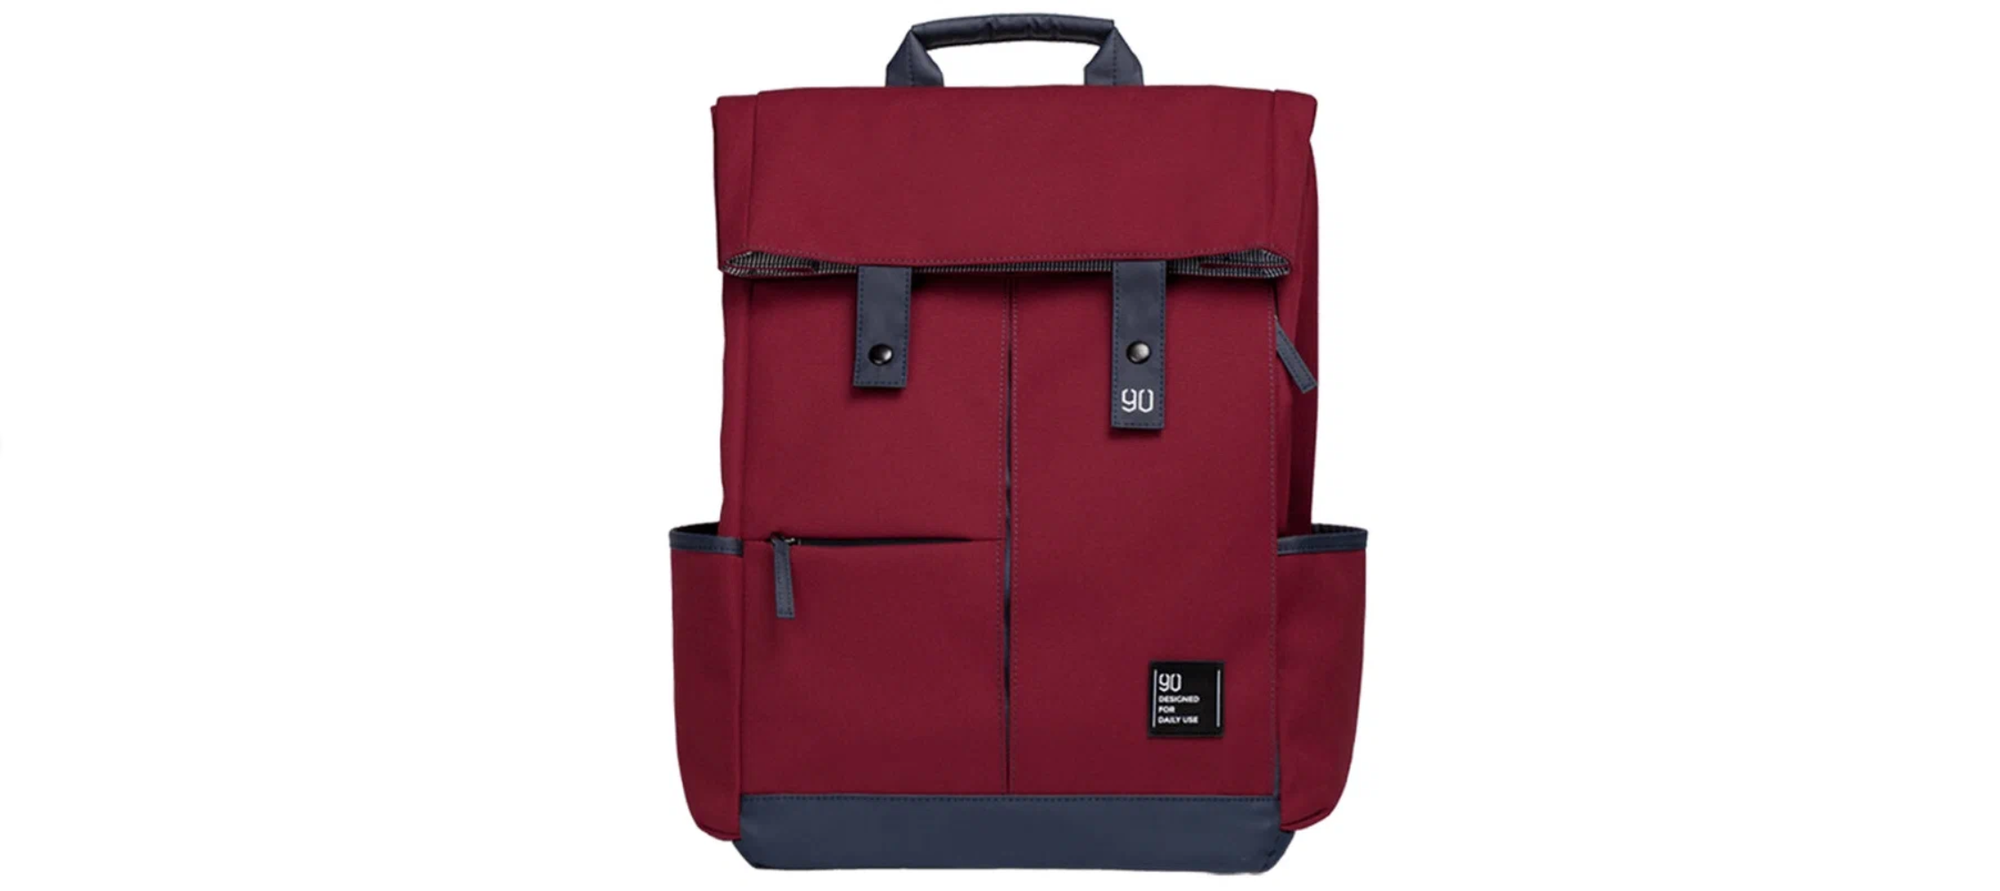 Рюкзак Xiaomi 90 Points Vibrant College Casual Backpack, Бордовый